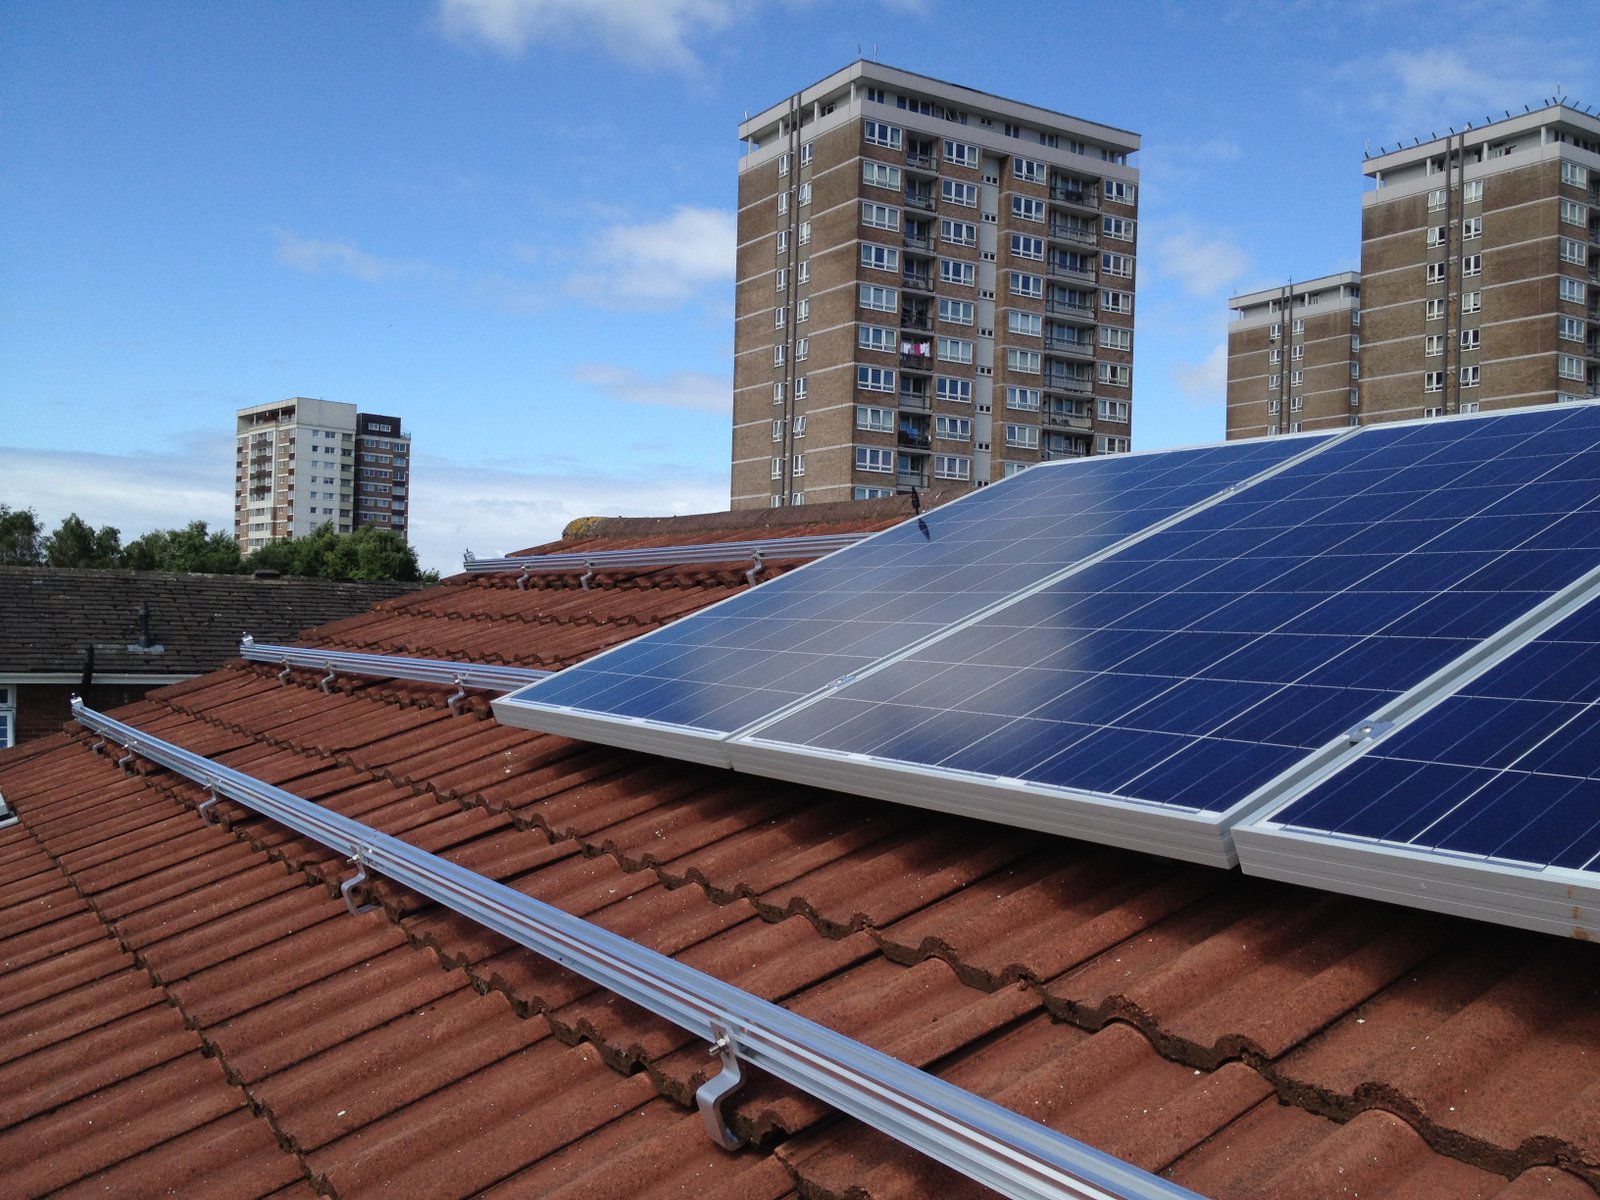 Solar panels installed by Rainhill Home Improvement and Energy Services